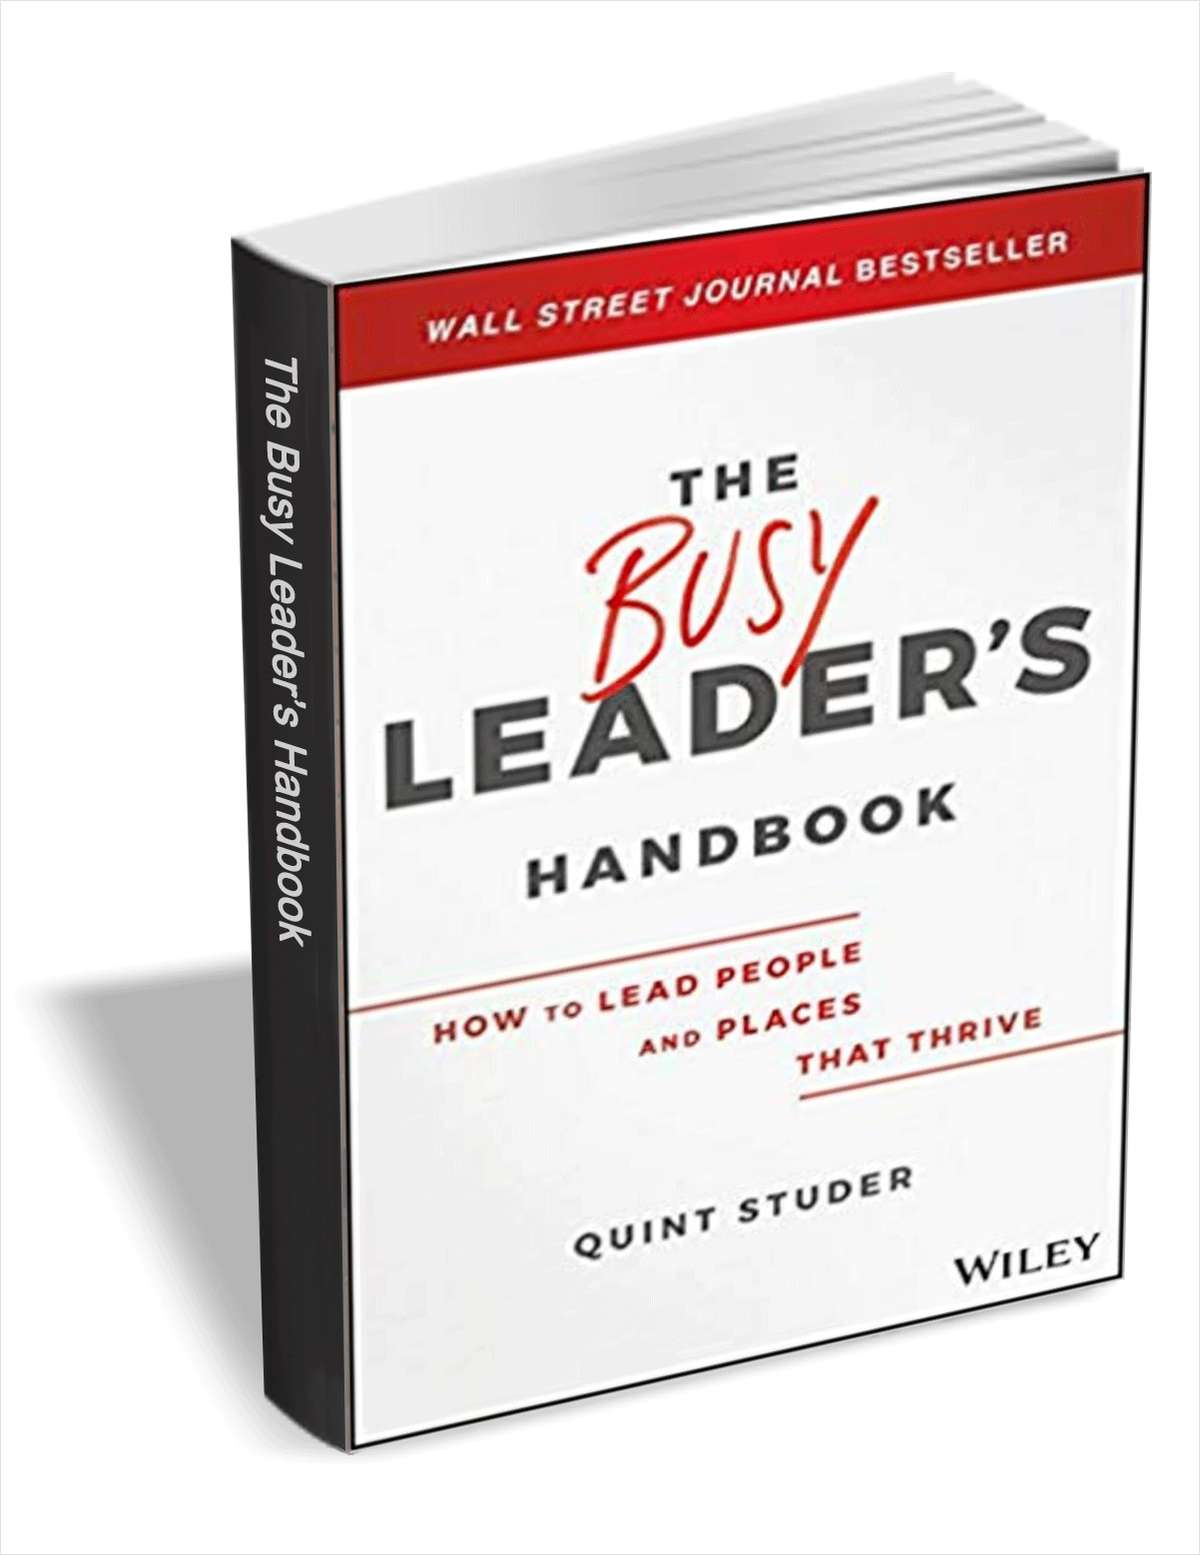 [expired]-free-ebook:-“the-busy-leader’s-handbook:-how-to-lead-people-and-places-that-thrive-($17.00-value)-free-for-a-limited-time”